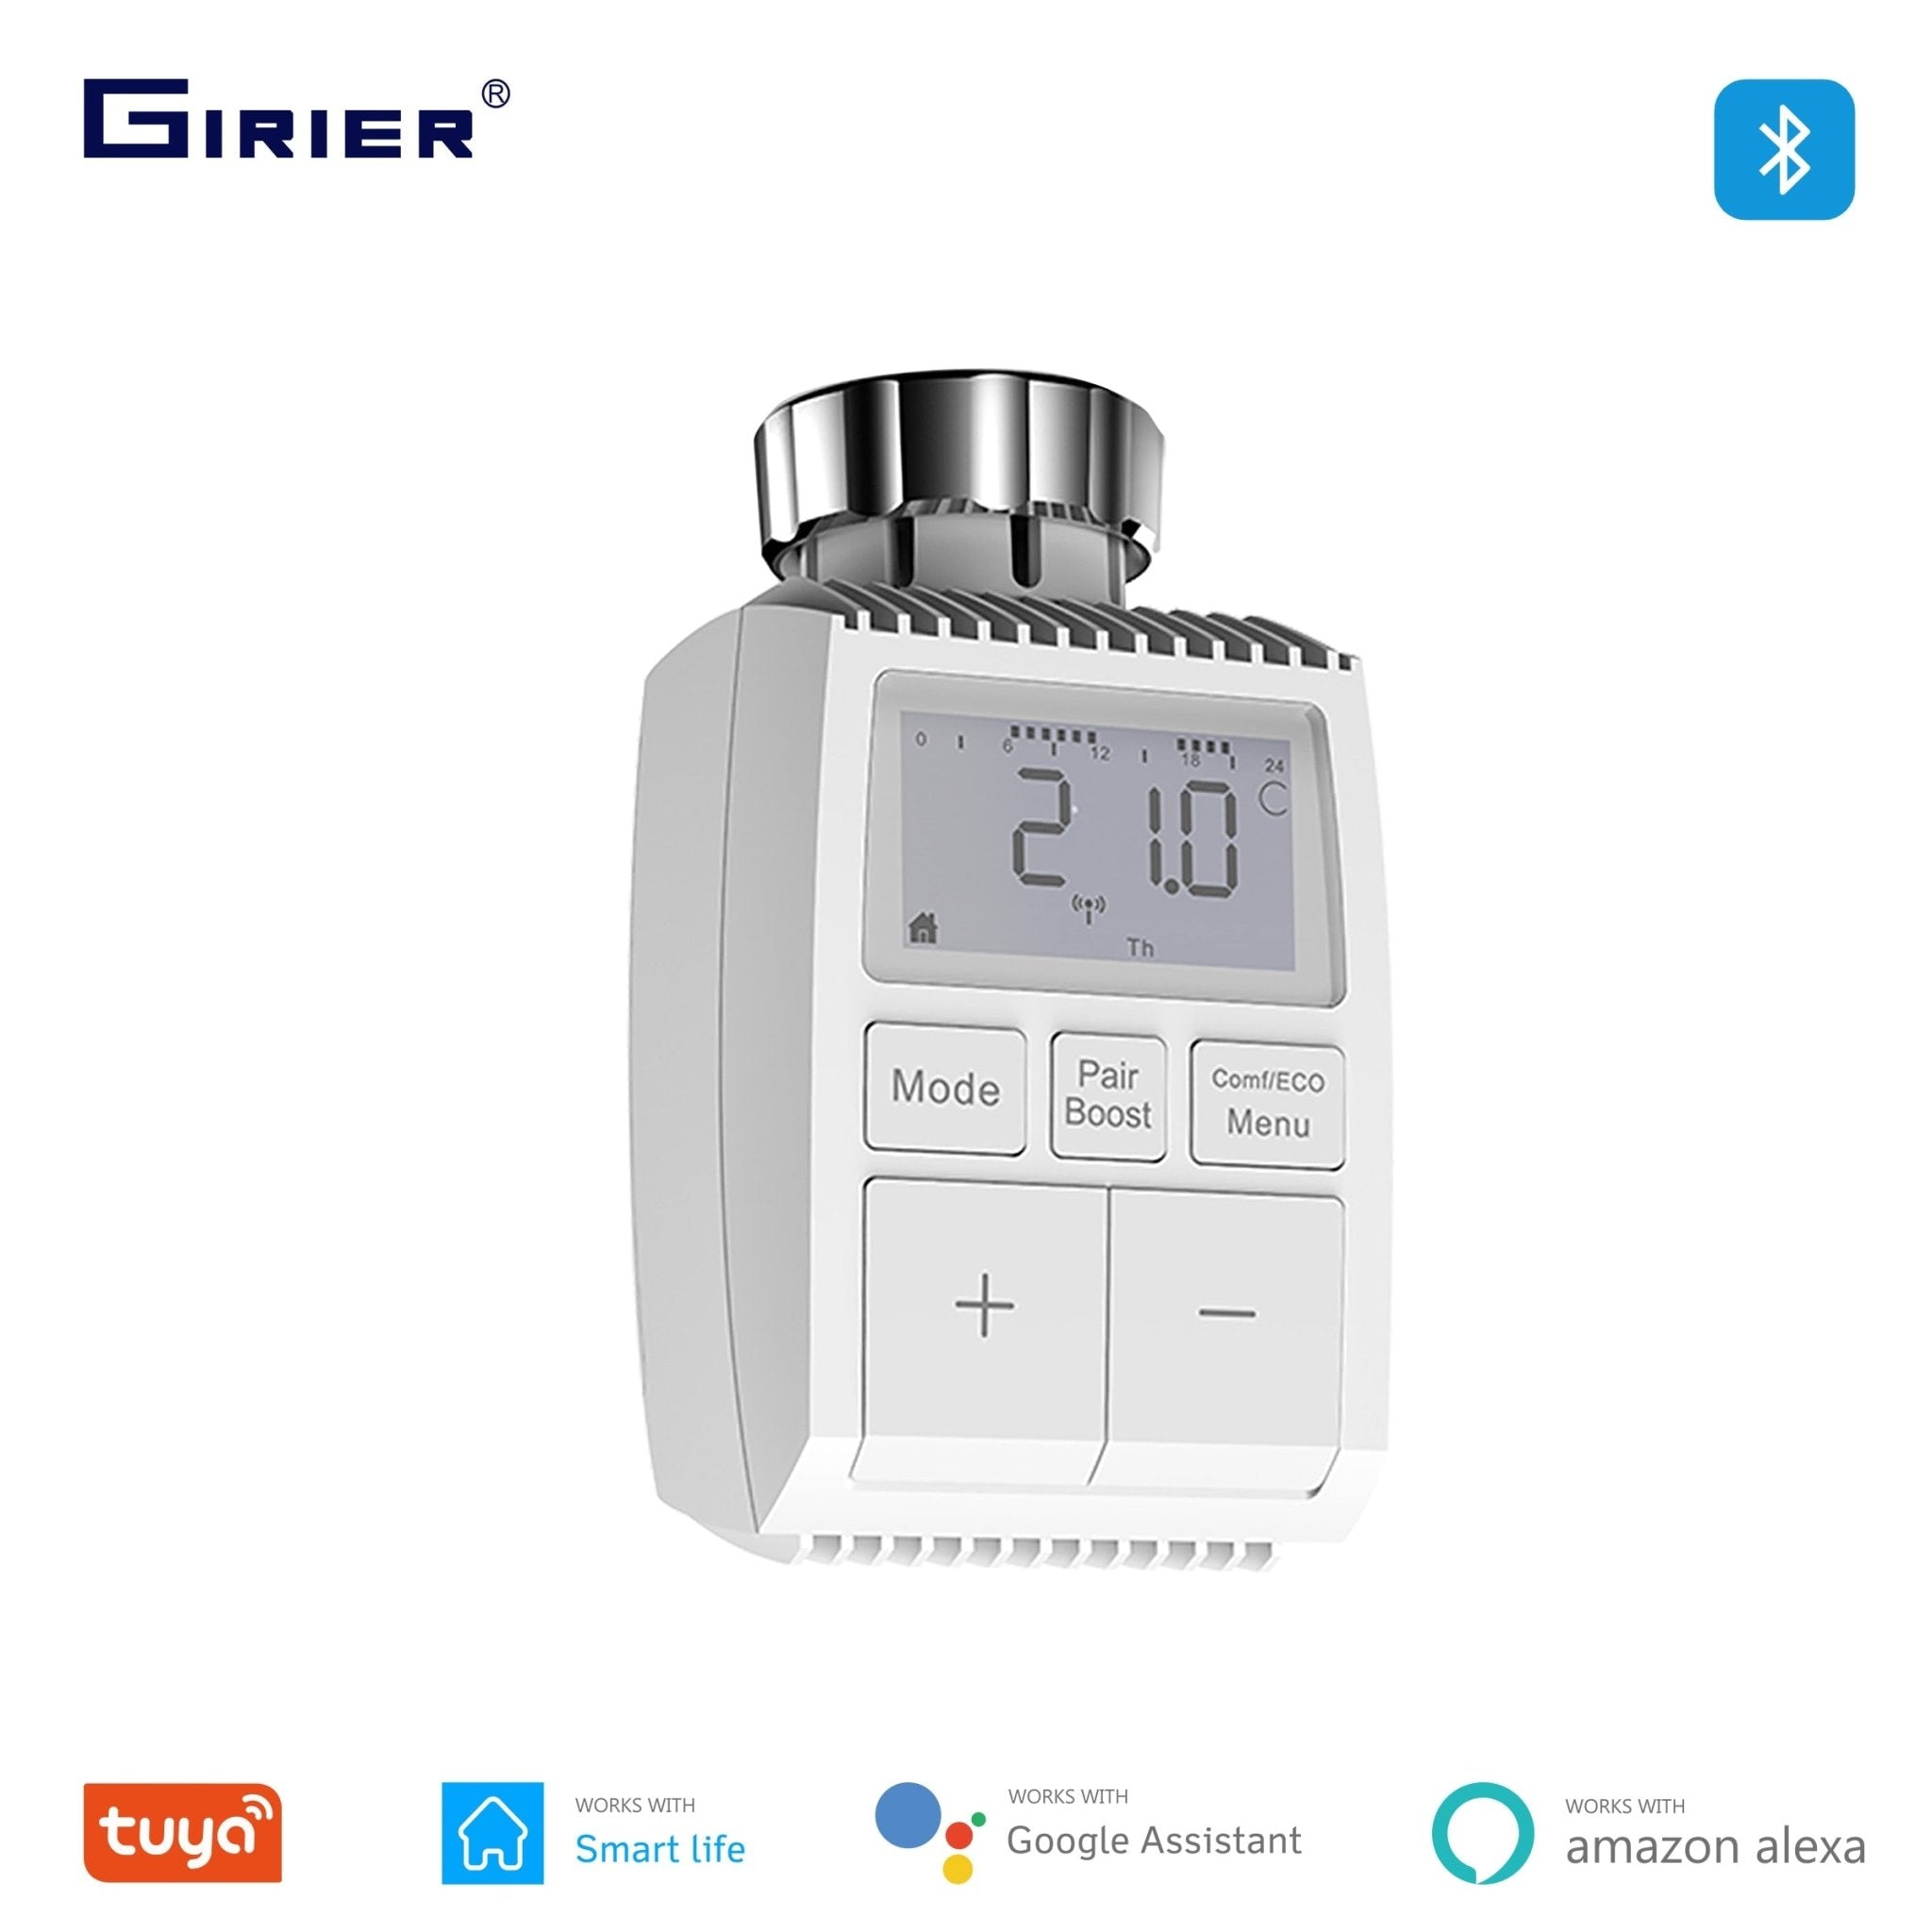 https://cdn.shopify.com/s/files/1/0406/0702/3265/products/tuya-bluetooth-smart-trv-temperature-controller-thermostat-radiator-valve-for-water-floor-heating-works-with-alexa-goolge-home-534804.jpg?v=1641830746